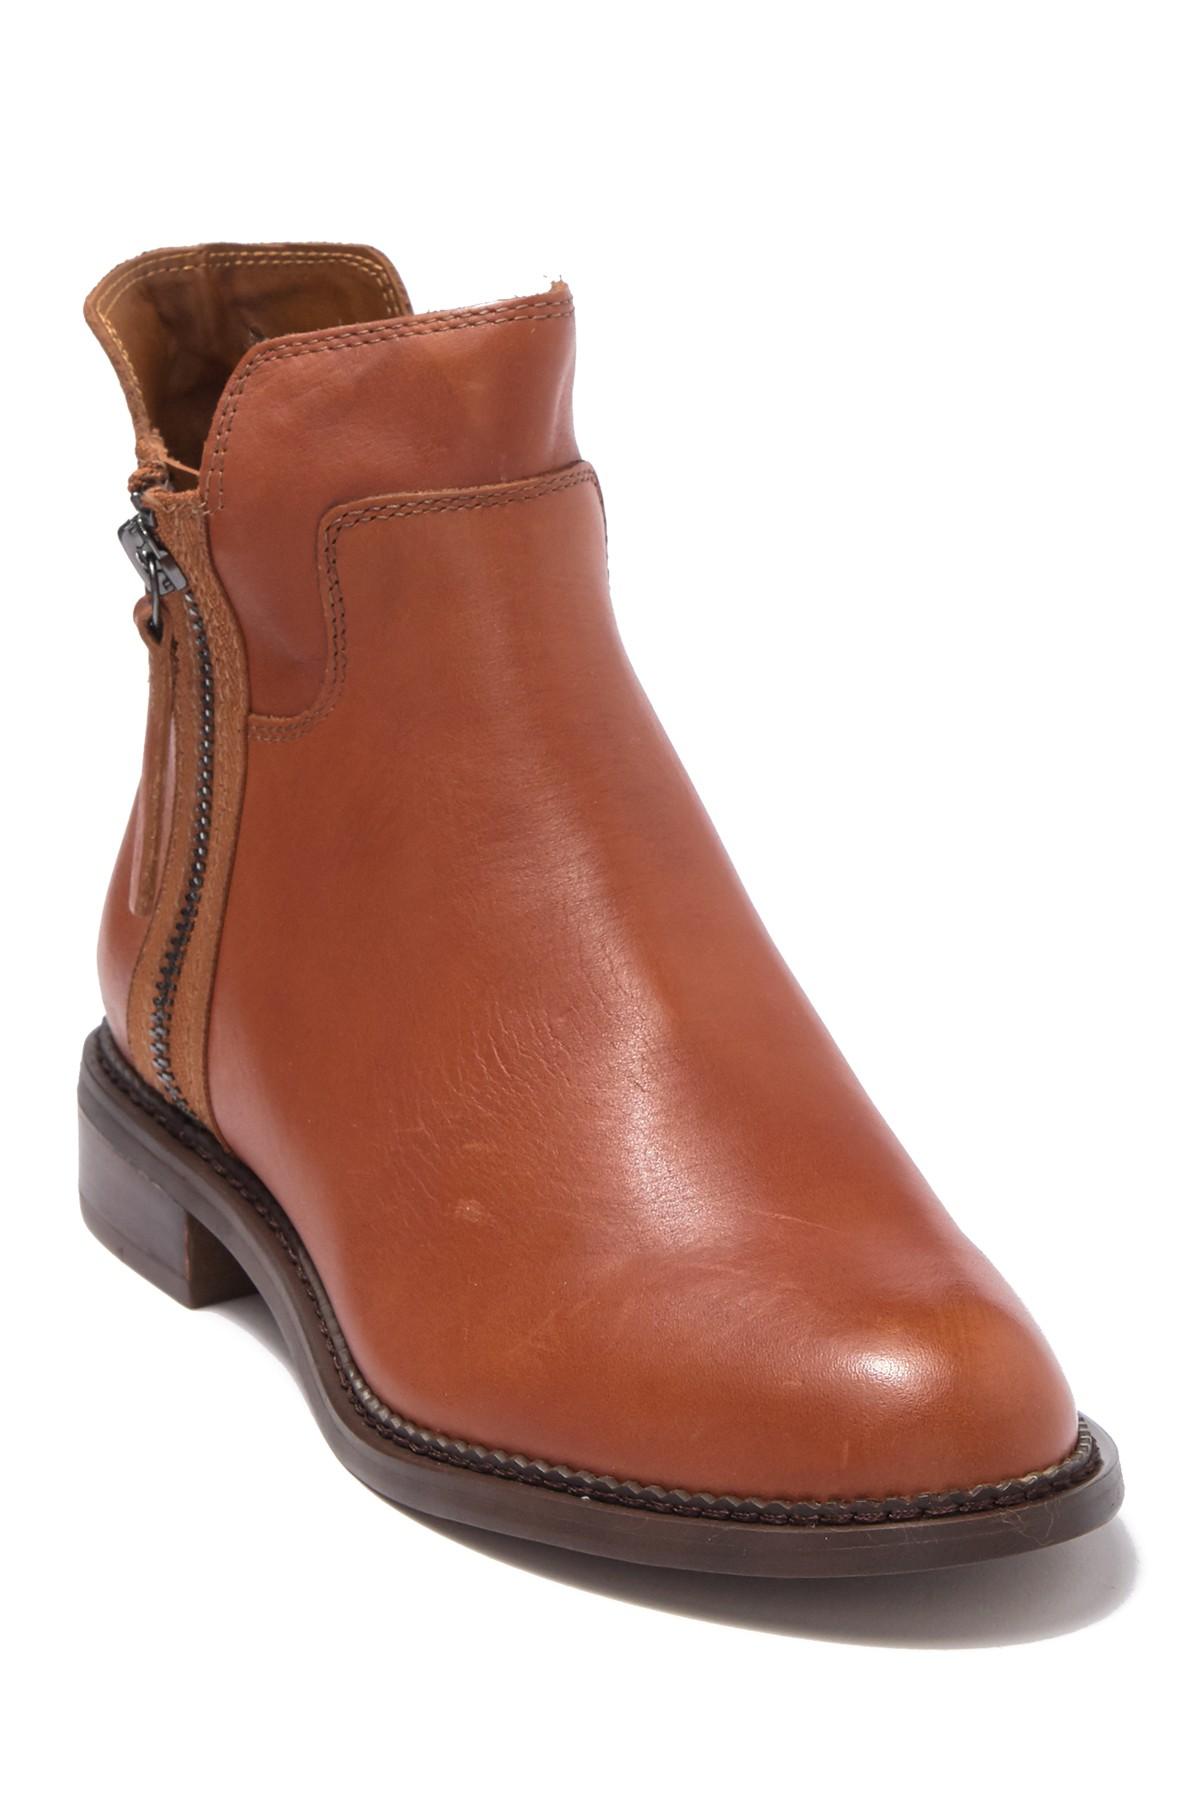 Franco Sarto Leather Halford Ankle Boot in Brown - Lyst